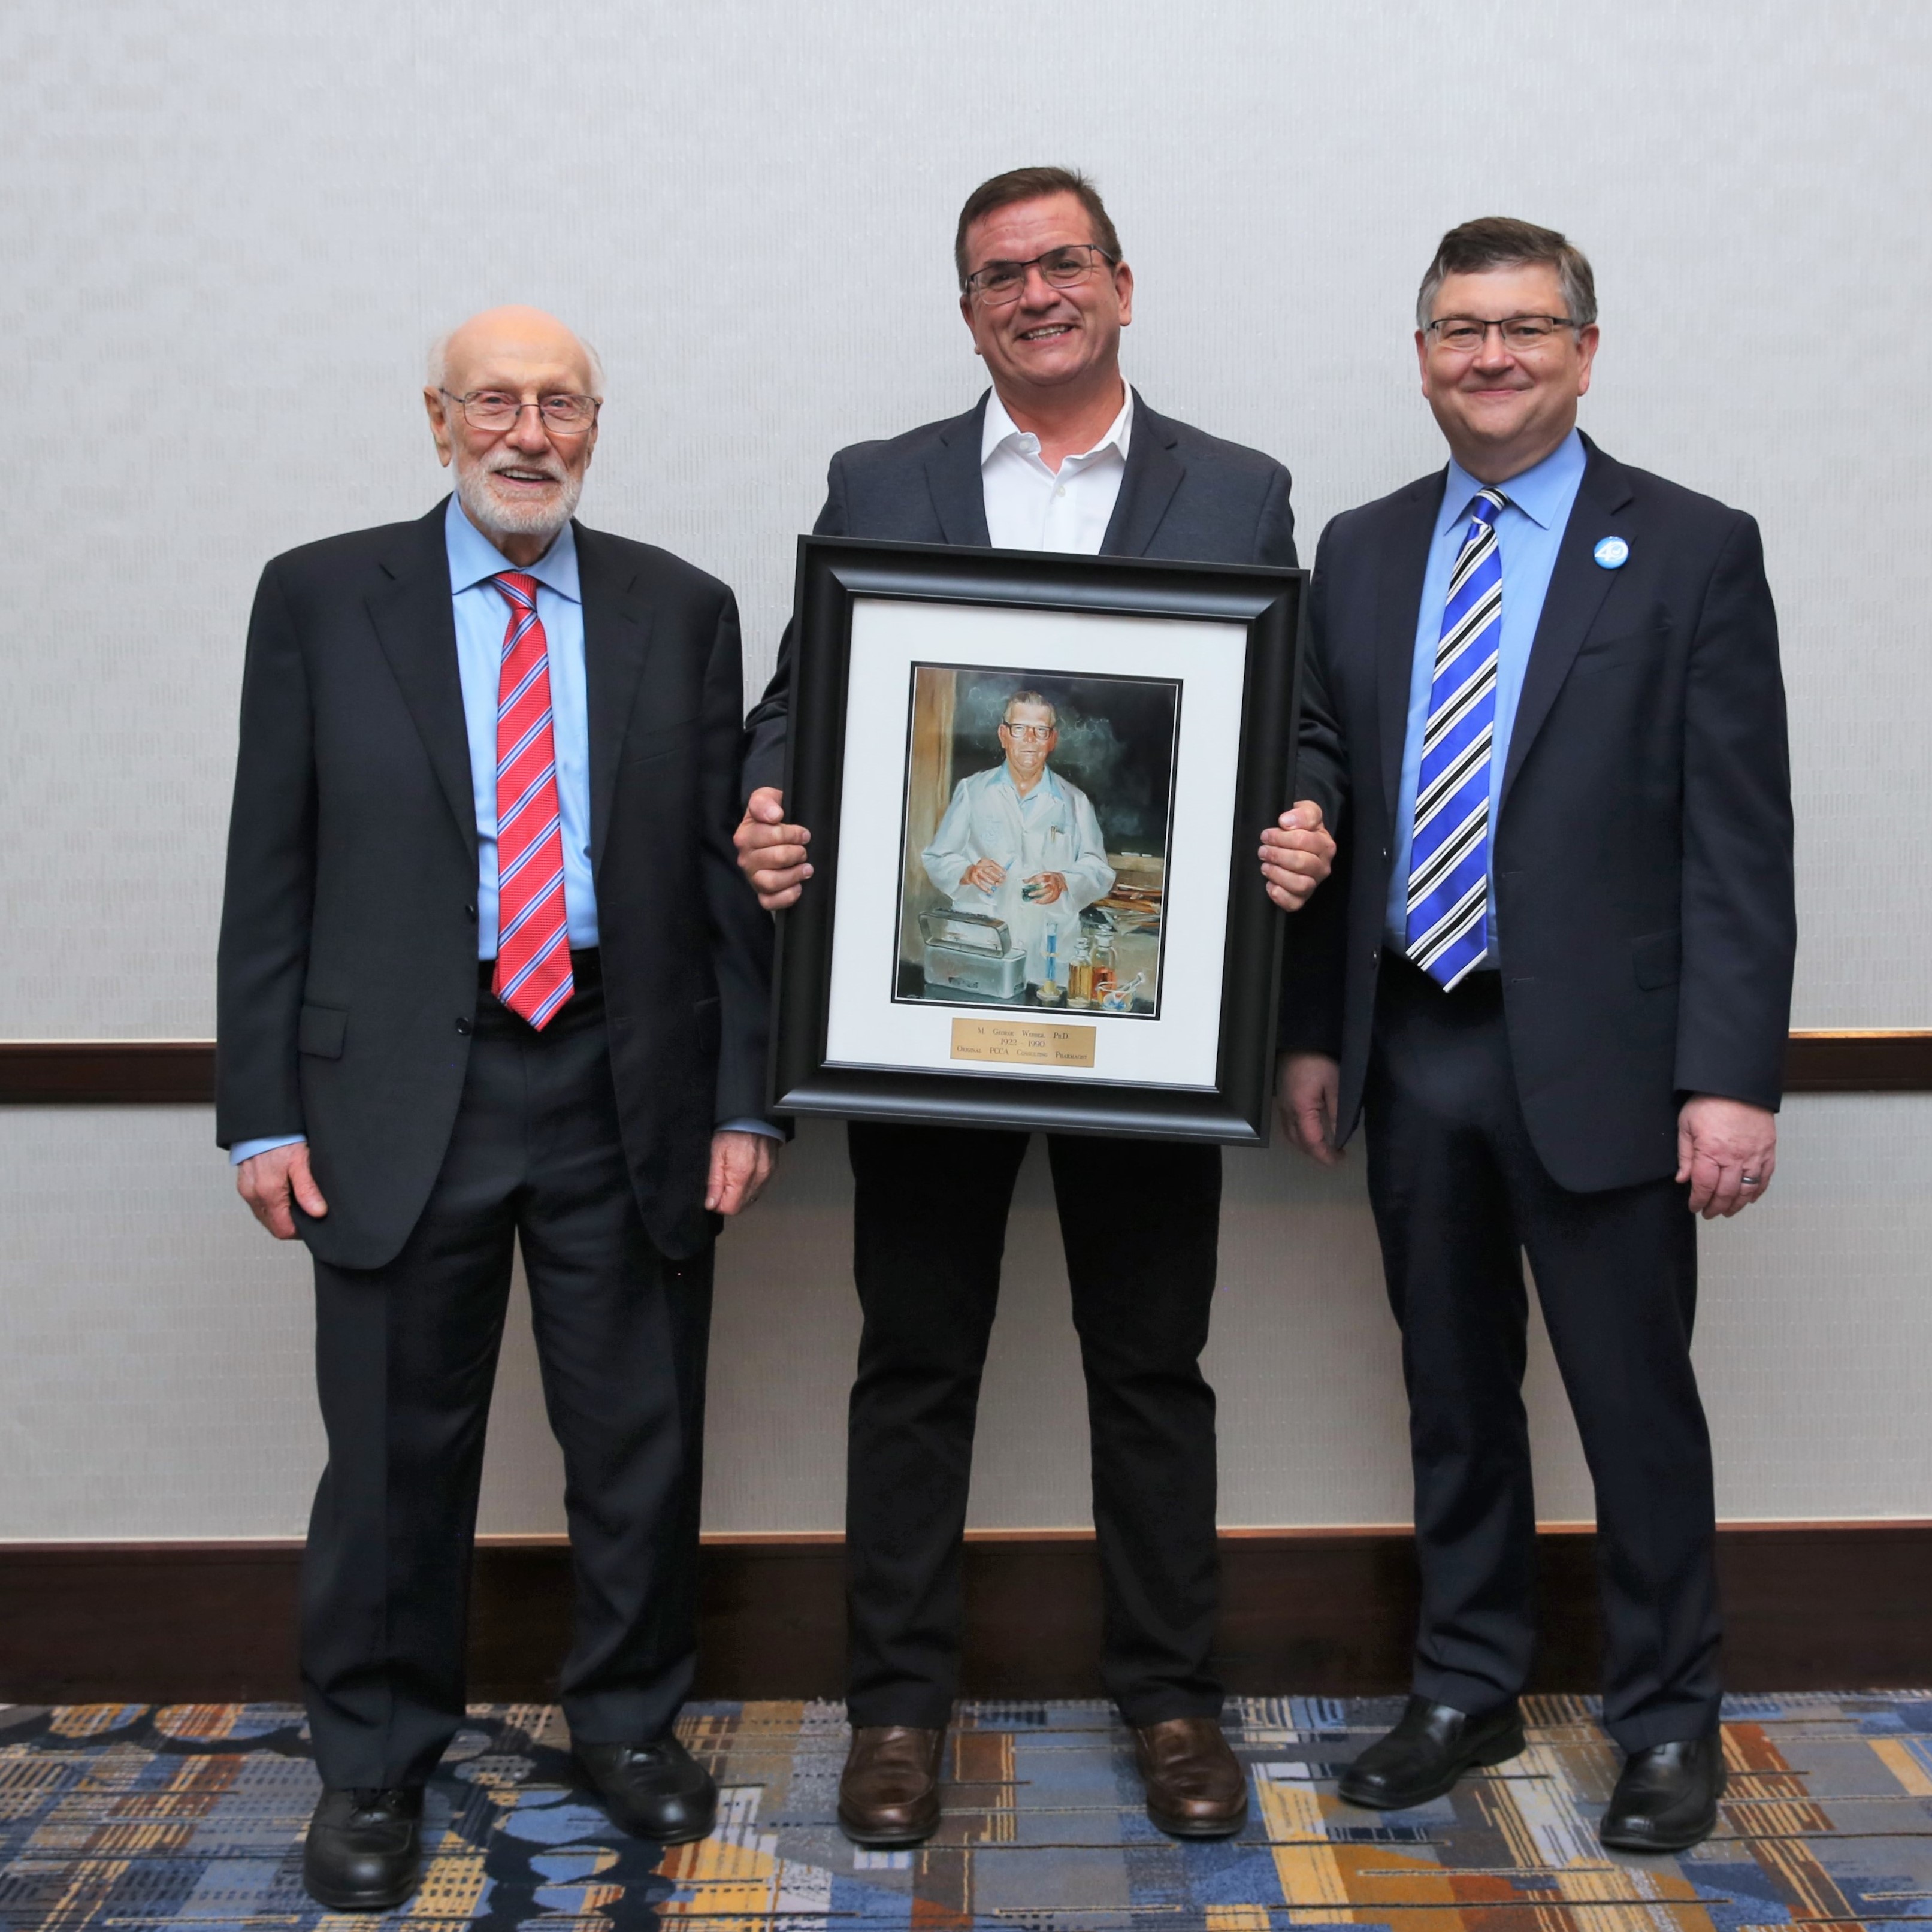 PCCA CEO L. David Sparks; 2021 Pharmacist of the Year Vincent M. Canzanese, RPh; PCCA President Jim Smith